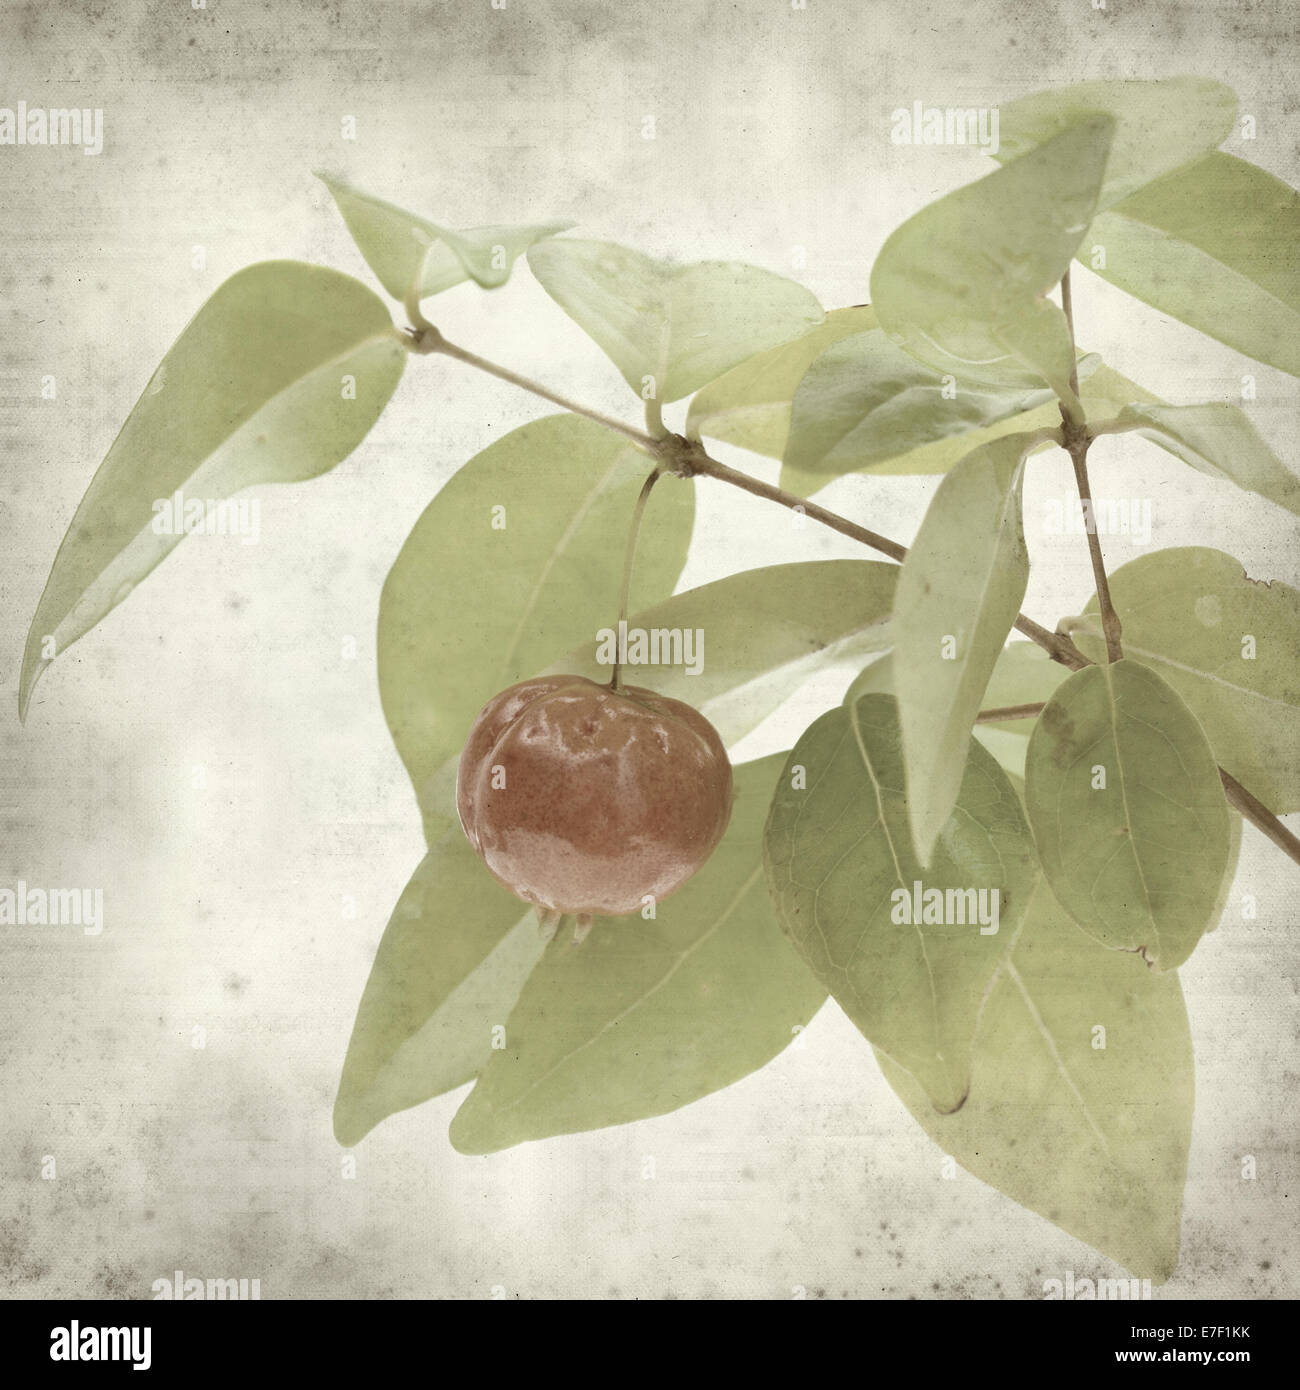 textured old paper background with Eugenia uniflora fruit Stock Photo